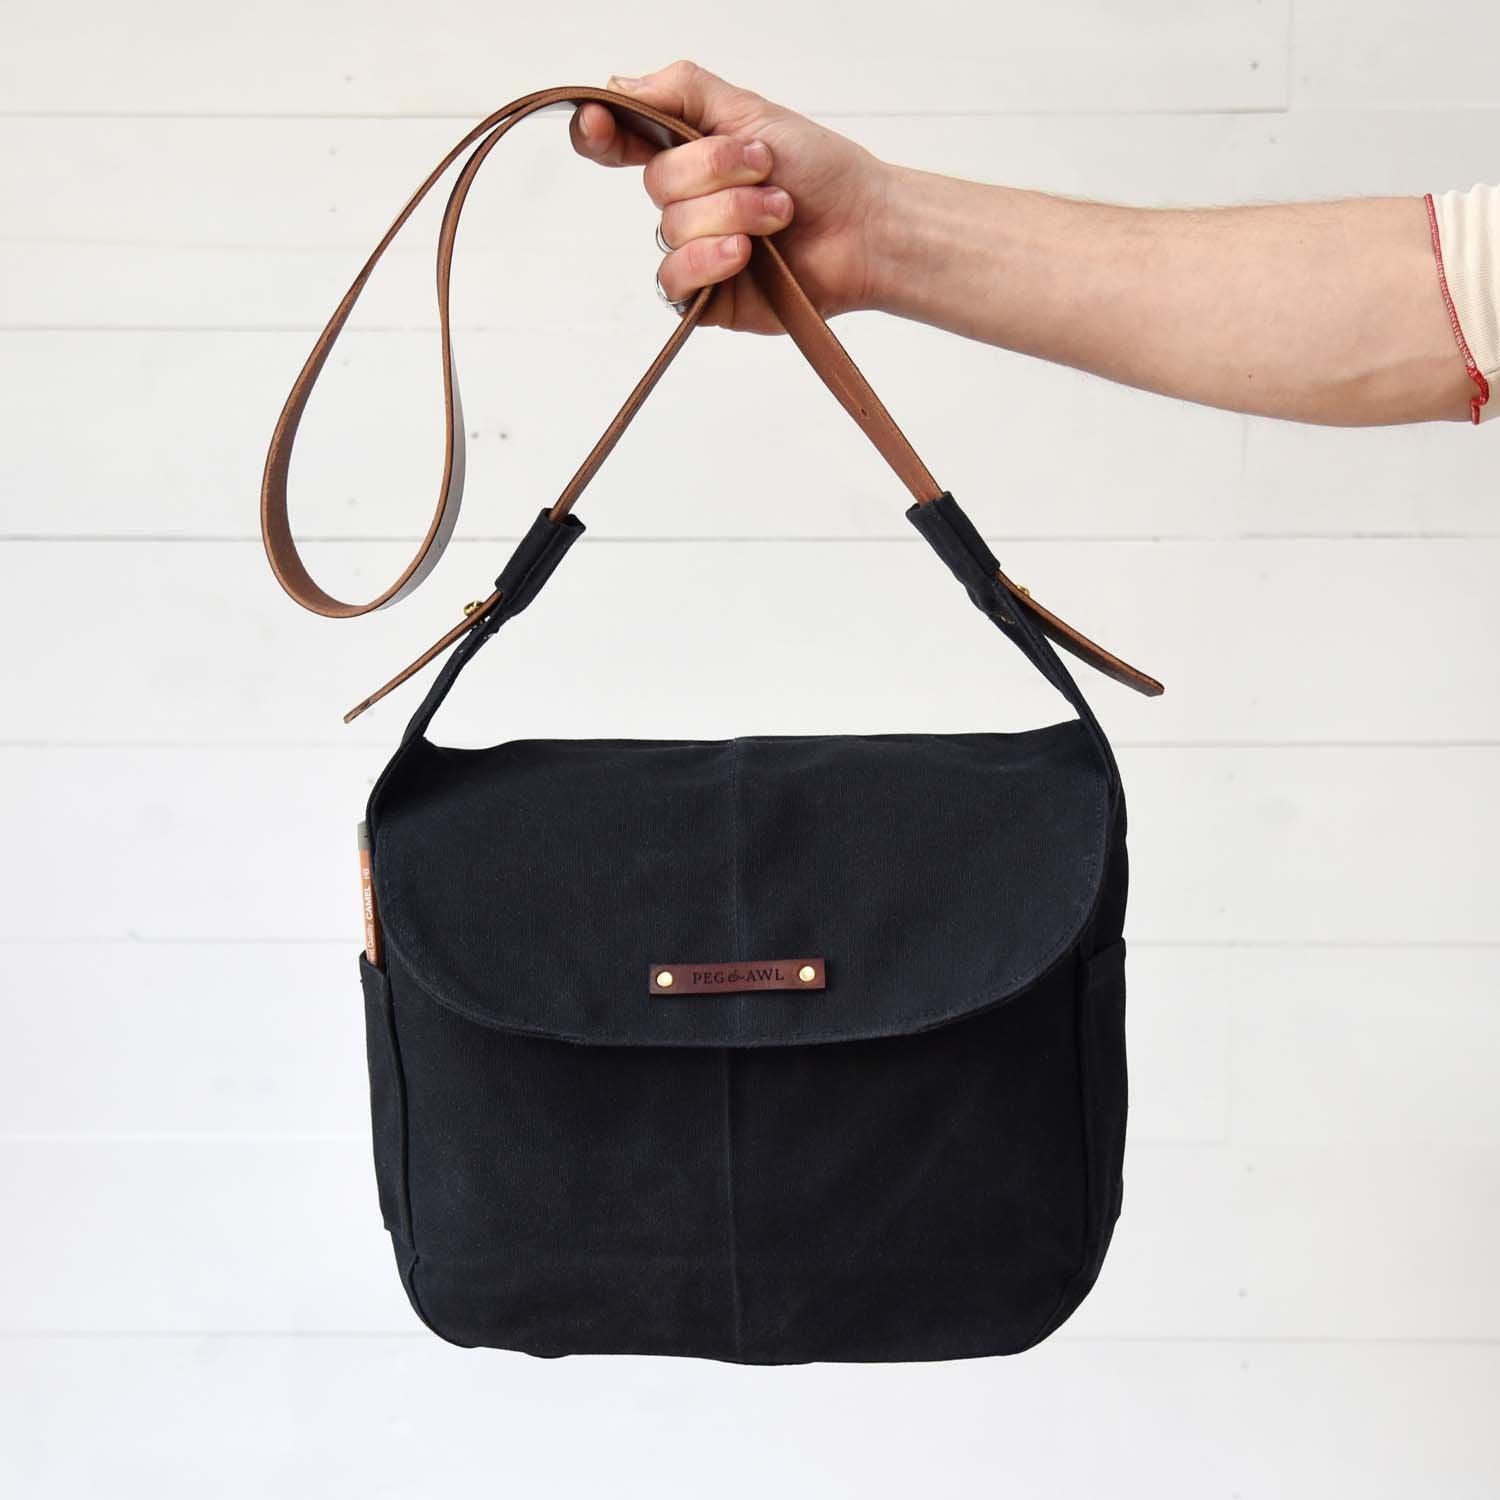 Vegan Leather Handmade Women's Handbags with double handles and detachable  Sling Strap